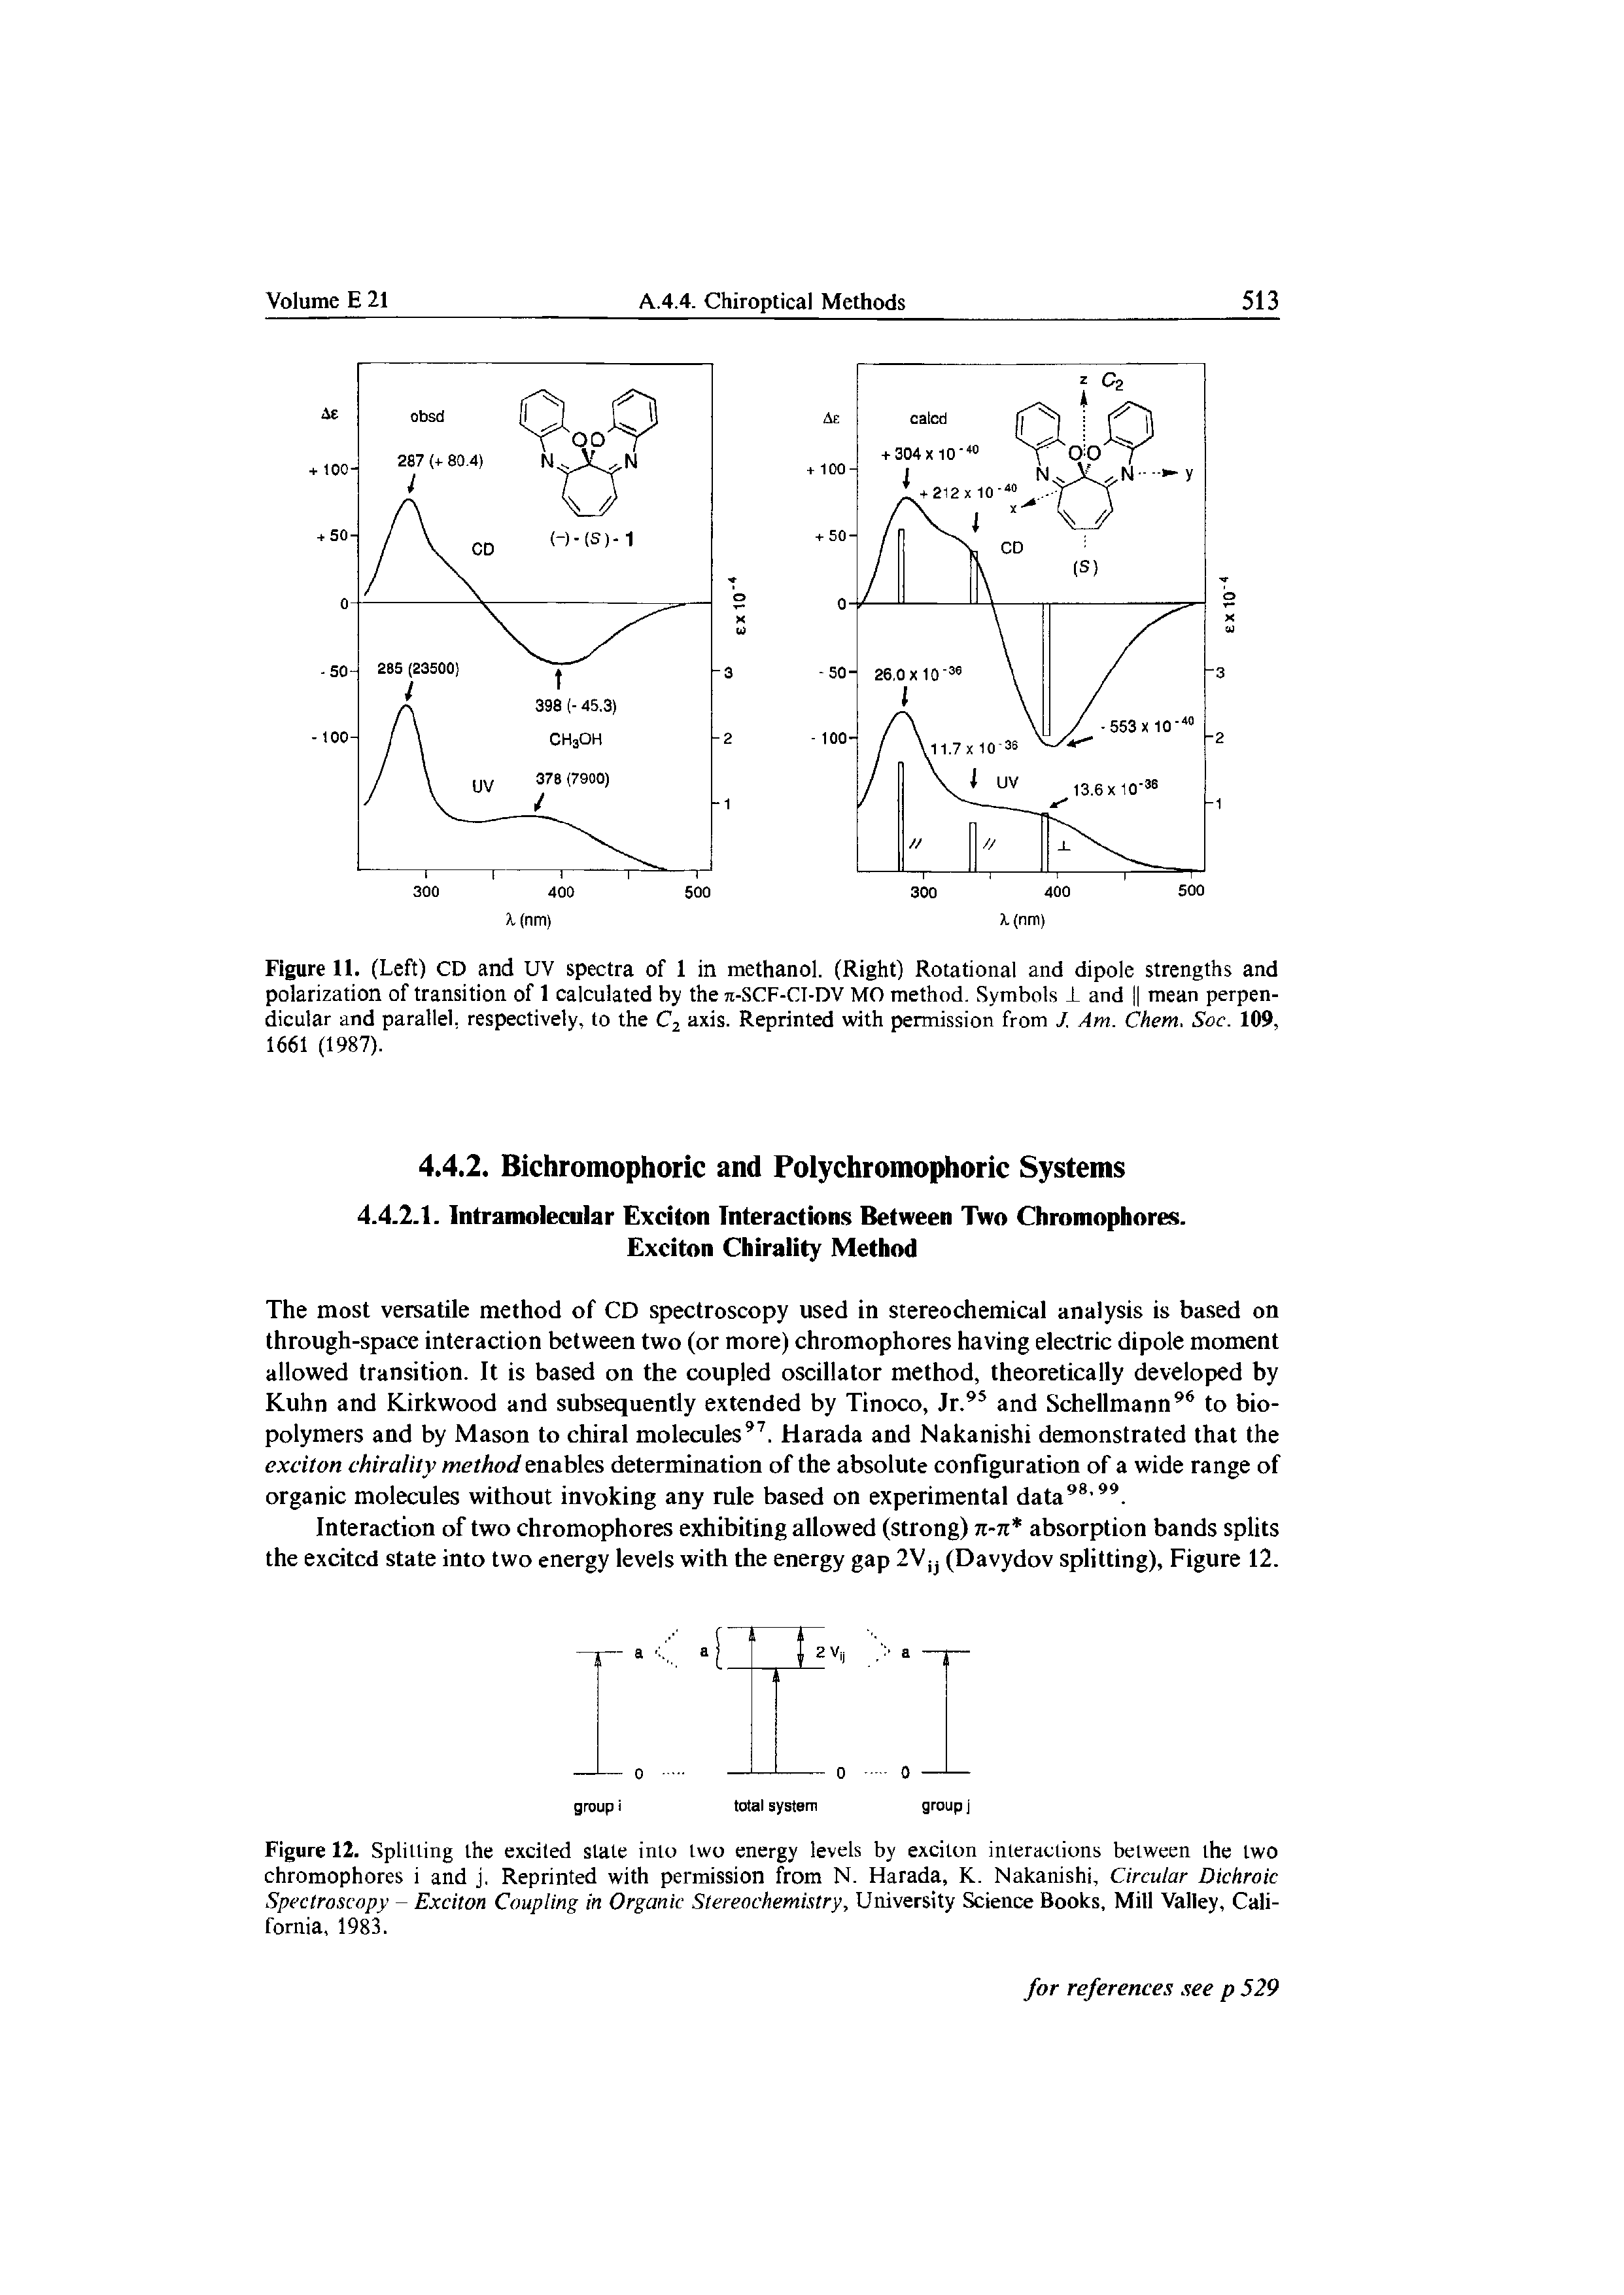 Figure 12. Splitting the excited slate into two energy levels by exciton interactions between the two chromophores i and j. Reprinted with permission from N. Harada, K. Nakanishi, Circular Dichroic Spectroscopy - Exciton Coupling in Organic Stereochemistry, University Science Books, Mill Valley, California, 1983.